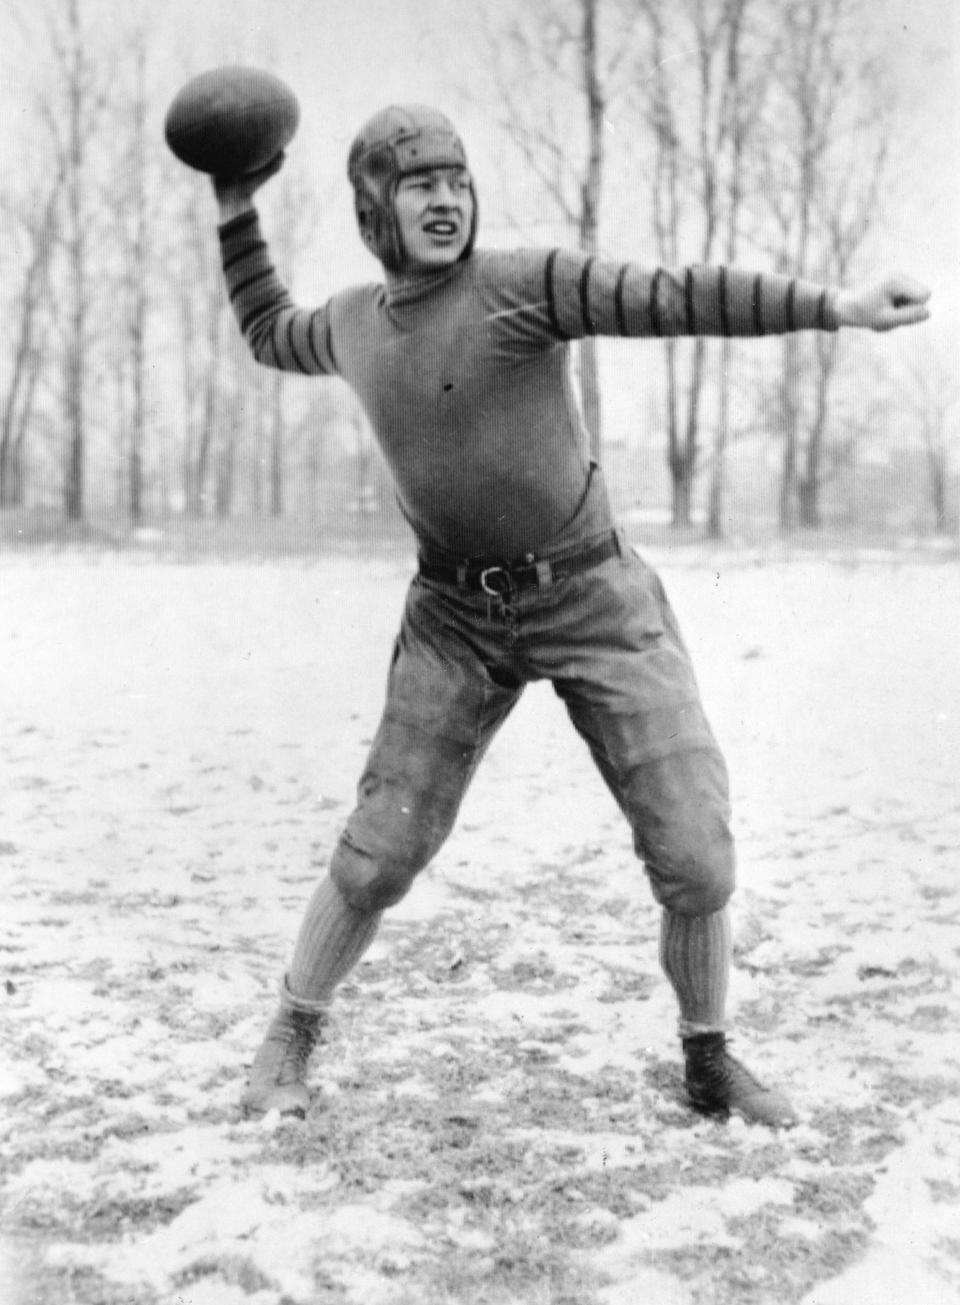 Earl L. (Curly) Lambeau is pictured in the early 1920s as a quarterback for the Green Bay Packers, a team which he help found.